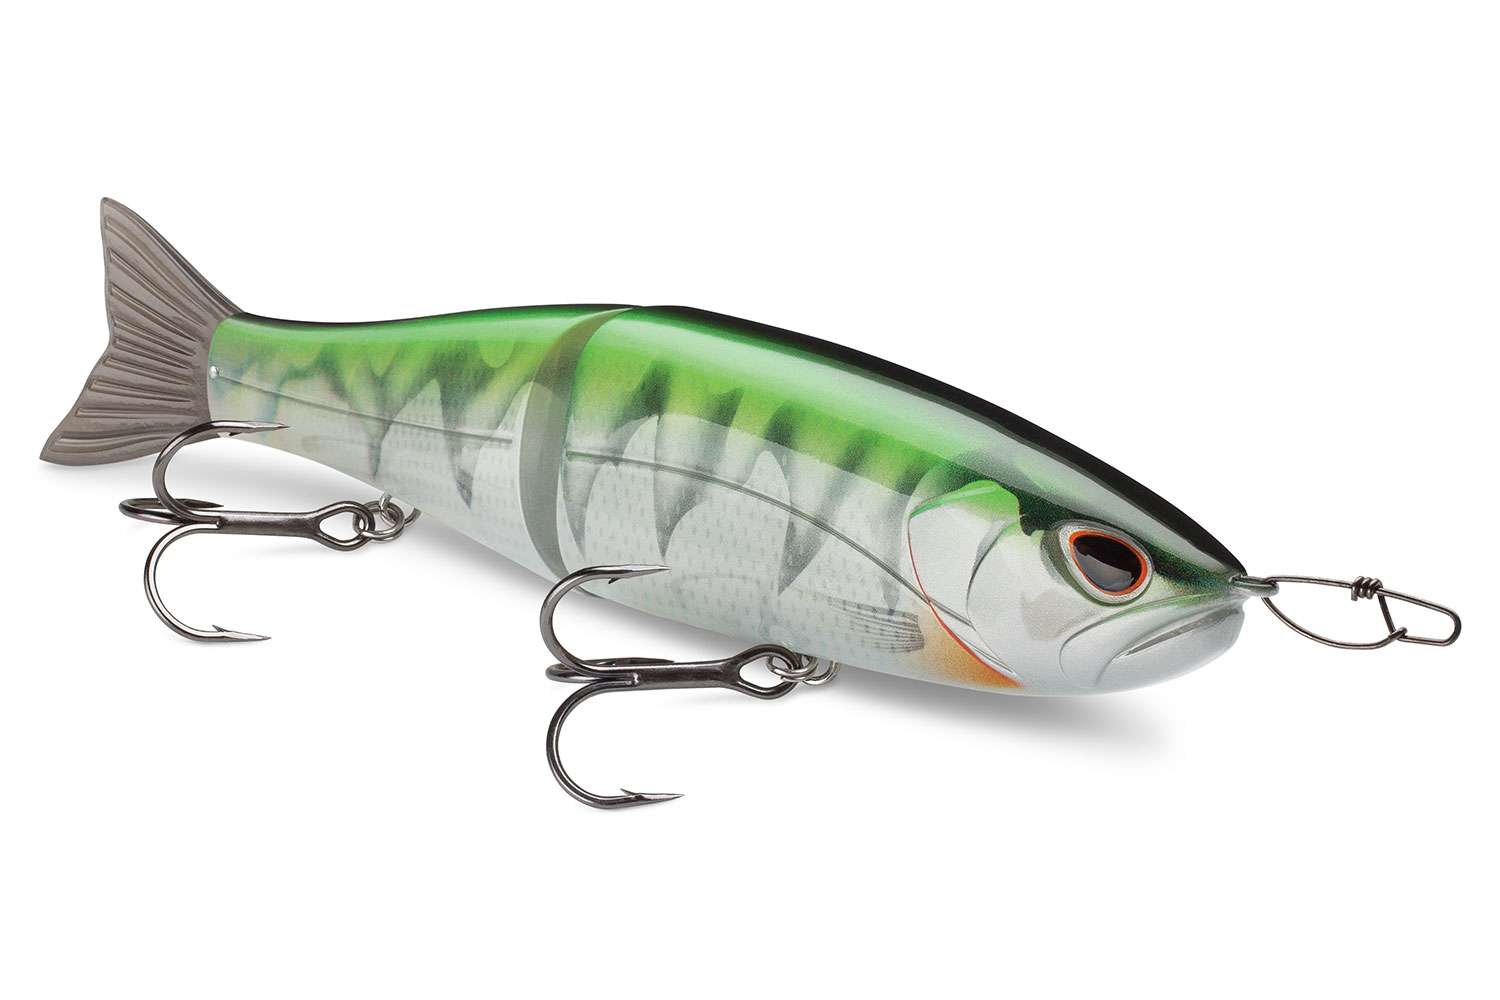   <B>Storm Arashi Glide Bait</B><BR> 
After years of design, testing, adjustments and more testing with Brandon Palaniuk, the Arashi Glide Bait delivers a fine-tuned, consistent, stable glide action at every speed. Developed to sink slowly in a slight head-down position, this bait responds to the slightest line movement. Swimming in an exaggerated âSâ action that piques interest of big bass, a quick snap of the rod tip turns the AGB 180 degrees, triggering strikes from followers. Versatile action, triple-pin hinge construction merged with swiveling hooks for reduced leverage and just the right color patterns result in an unbeatable masterpiece of lure design. Available in nine colors specifically designed for this lure, 7 1/2 inches in length, weighs 3 1/8 ounces, armed with 2/0 VMC trebles and features a sink rate of .4 feet per second. 
<BR>
<B>MSRP: $34.99</B>